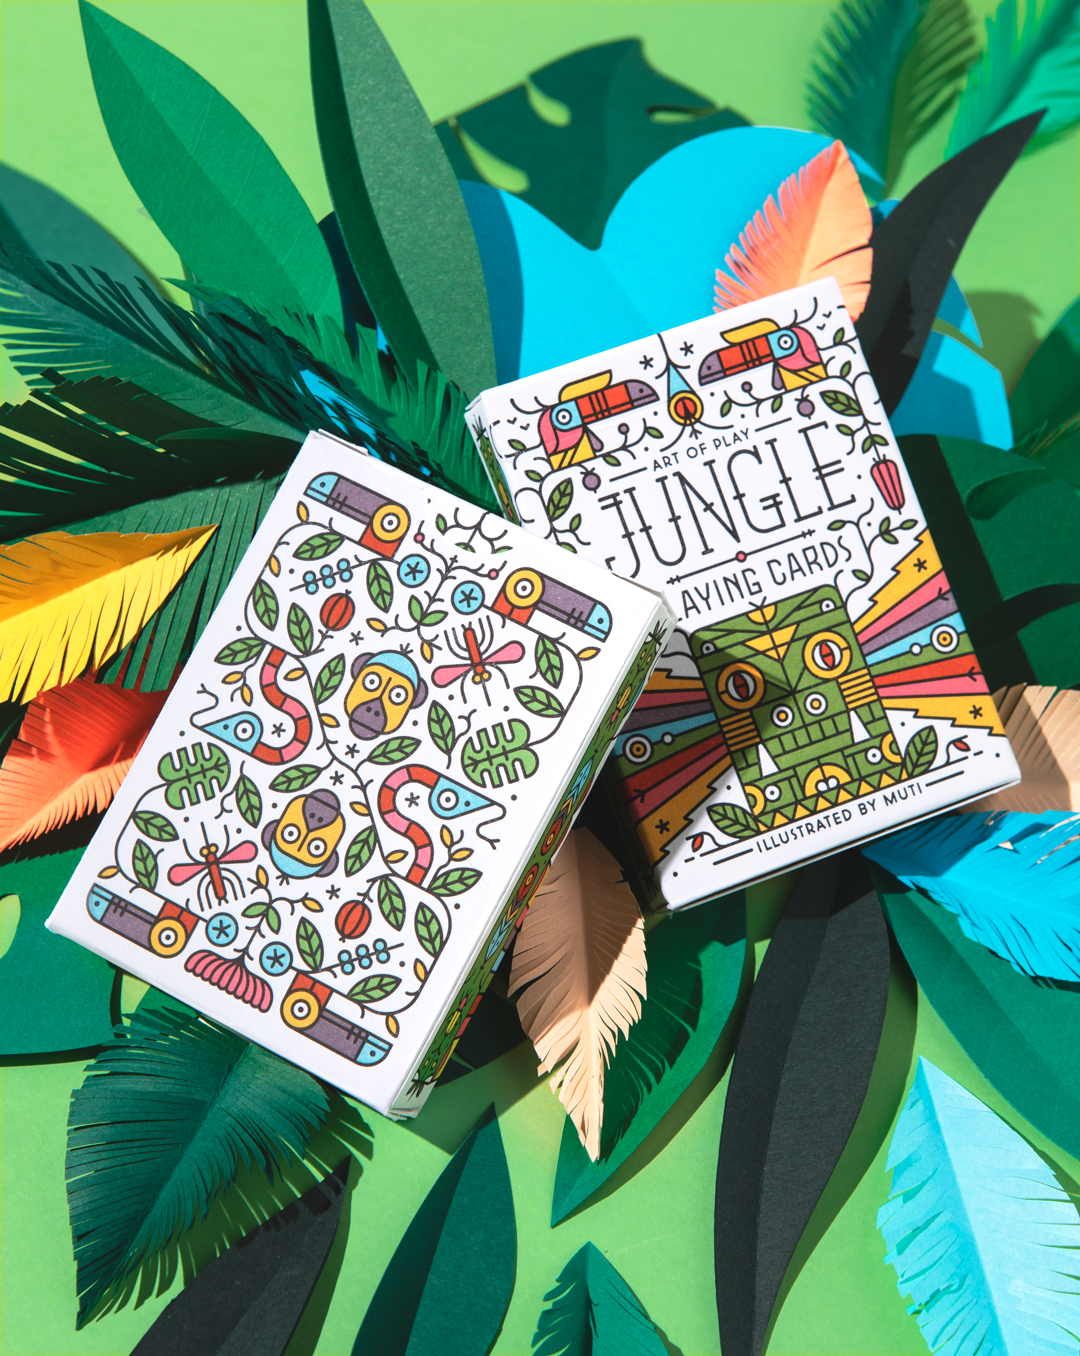 Jungle Playing Cards